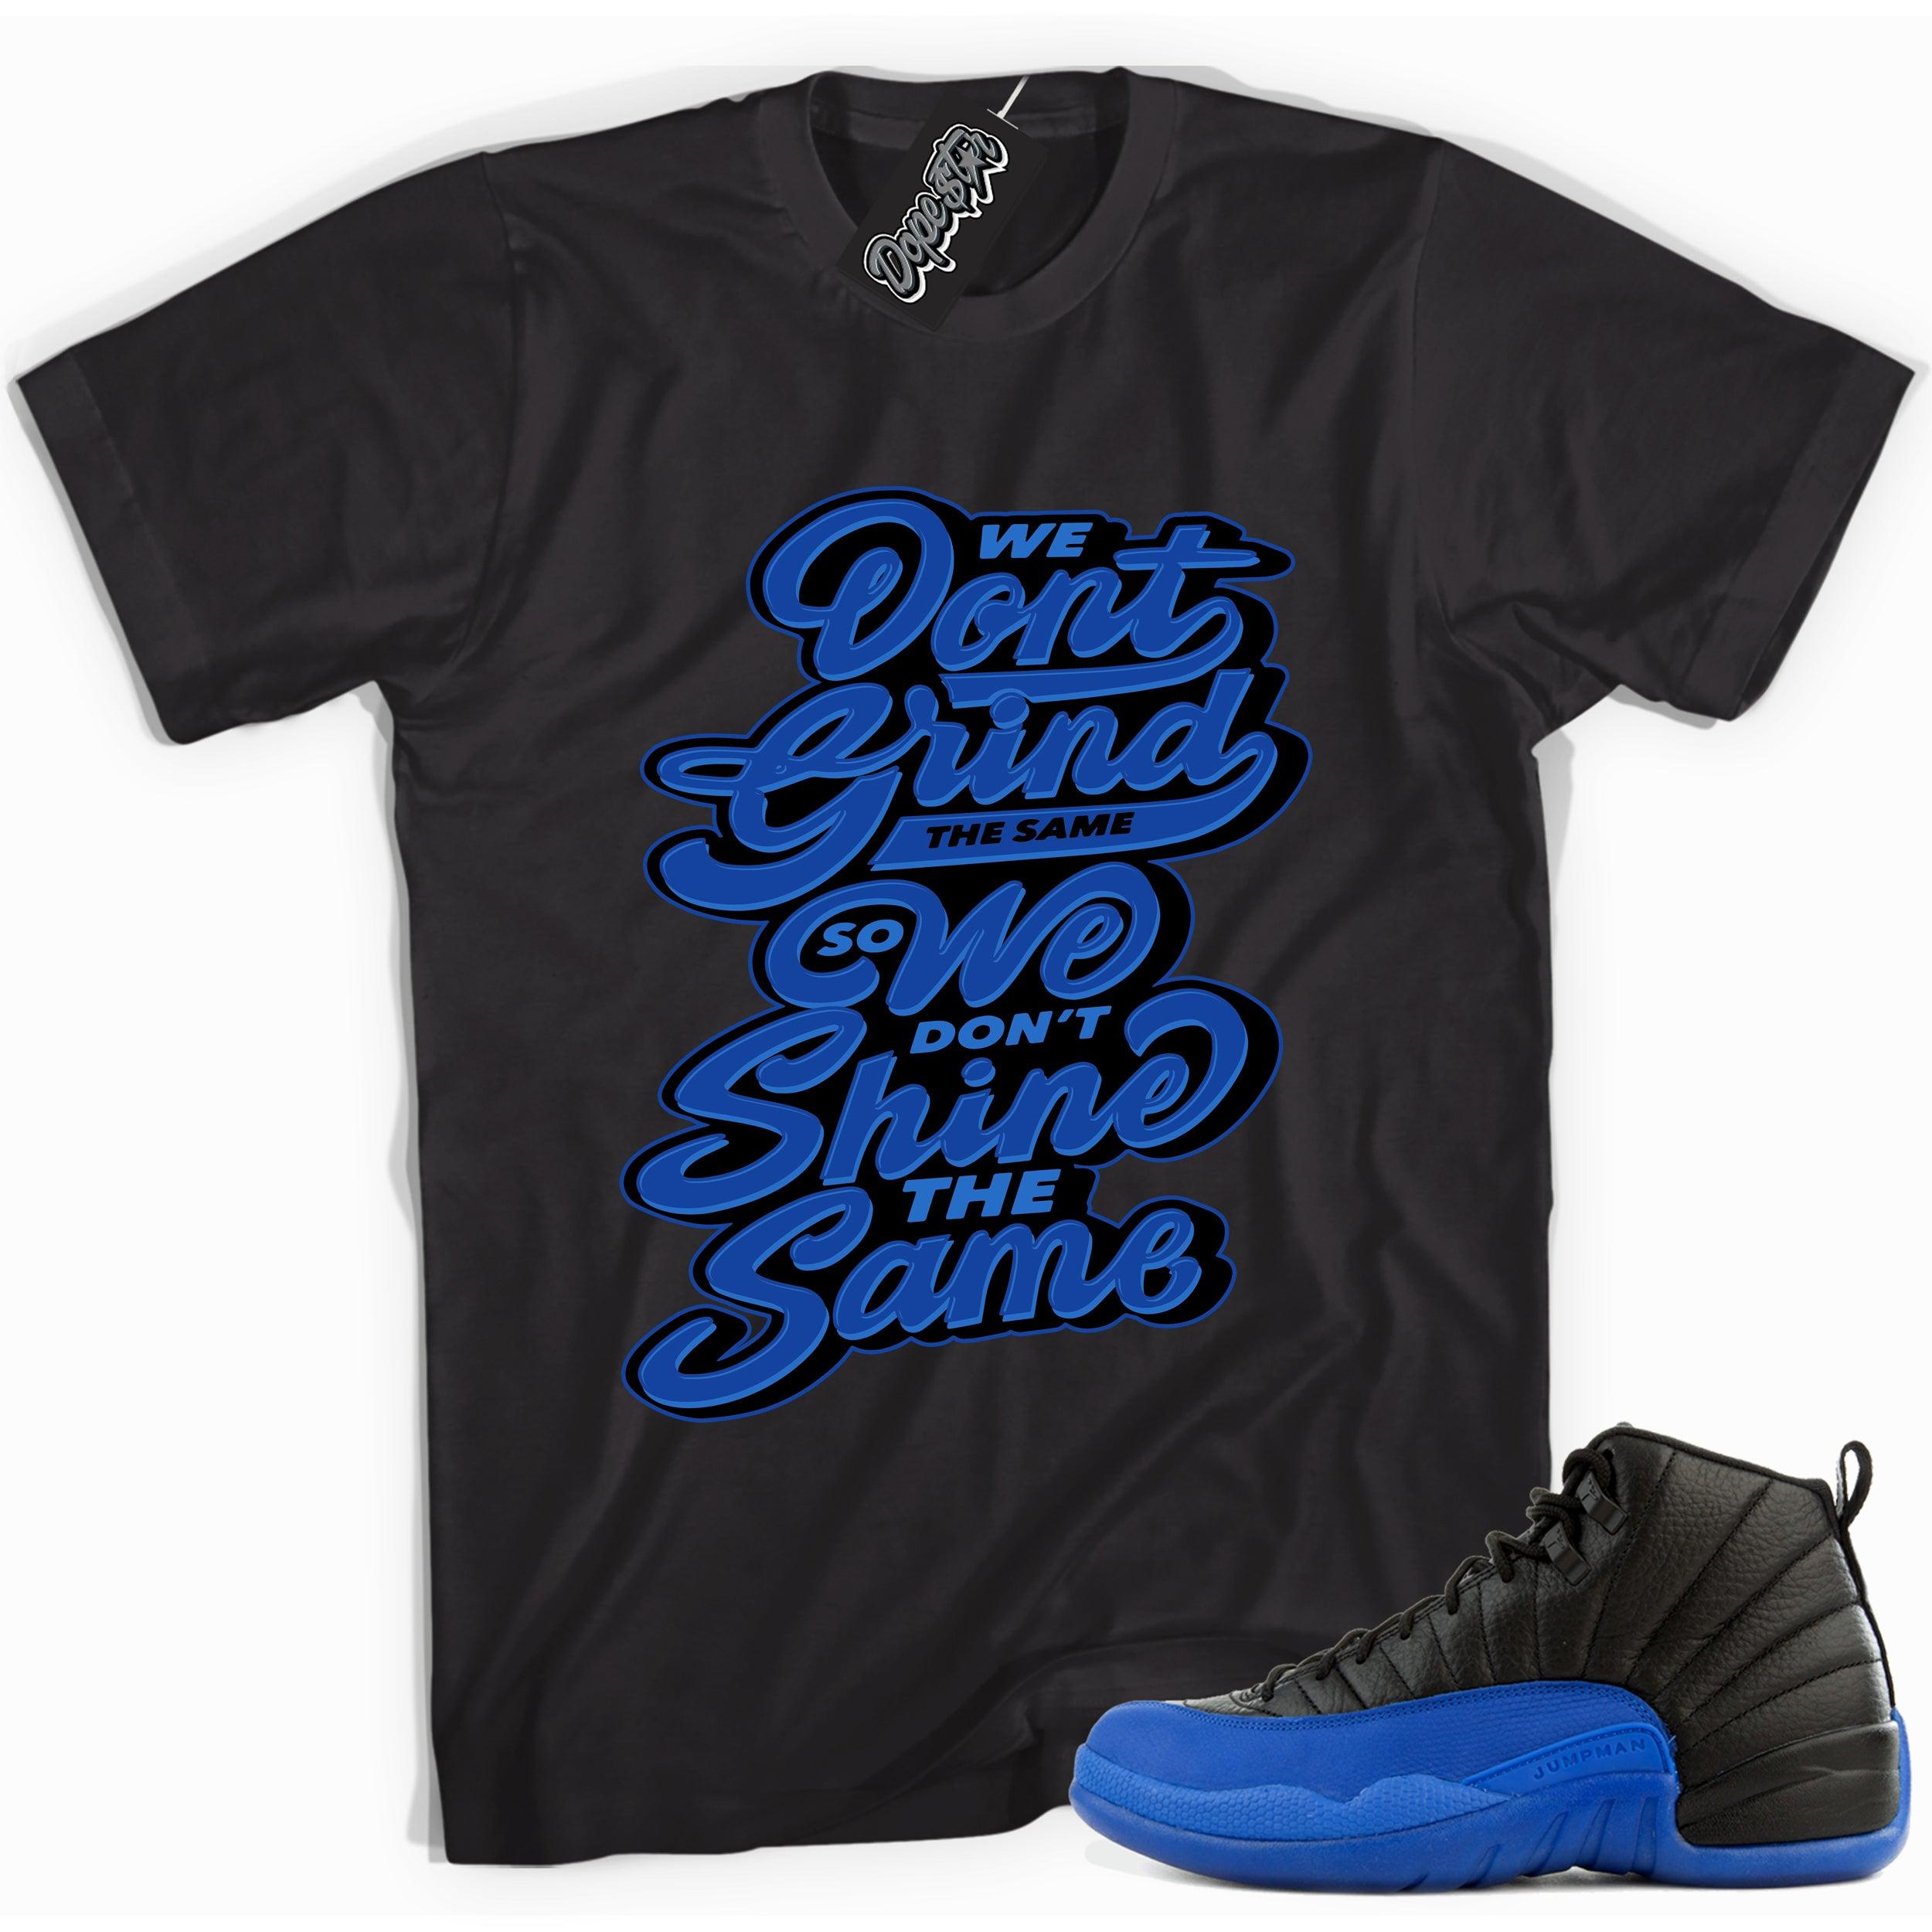 Cool black graphic tee with 'we don't grind the same' print, that perfectly matches  Air Jordan 12 Retro Black Game Royal sneakers.